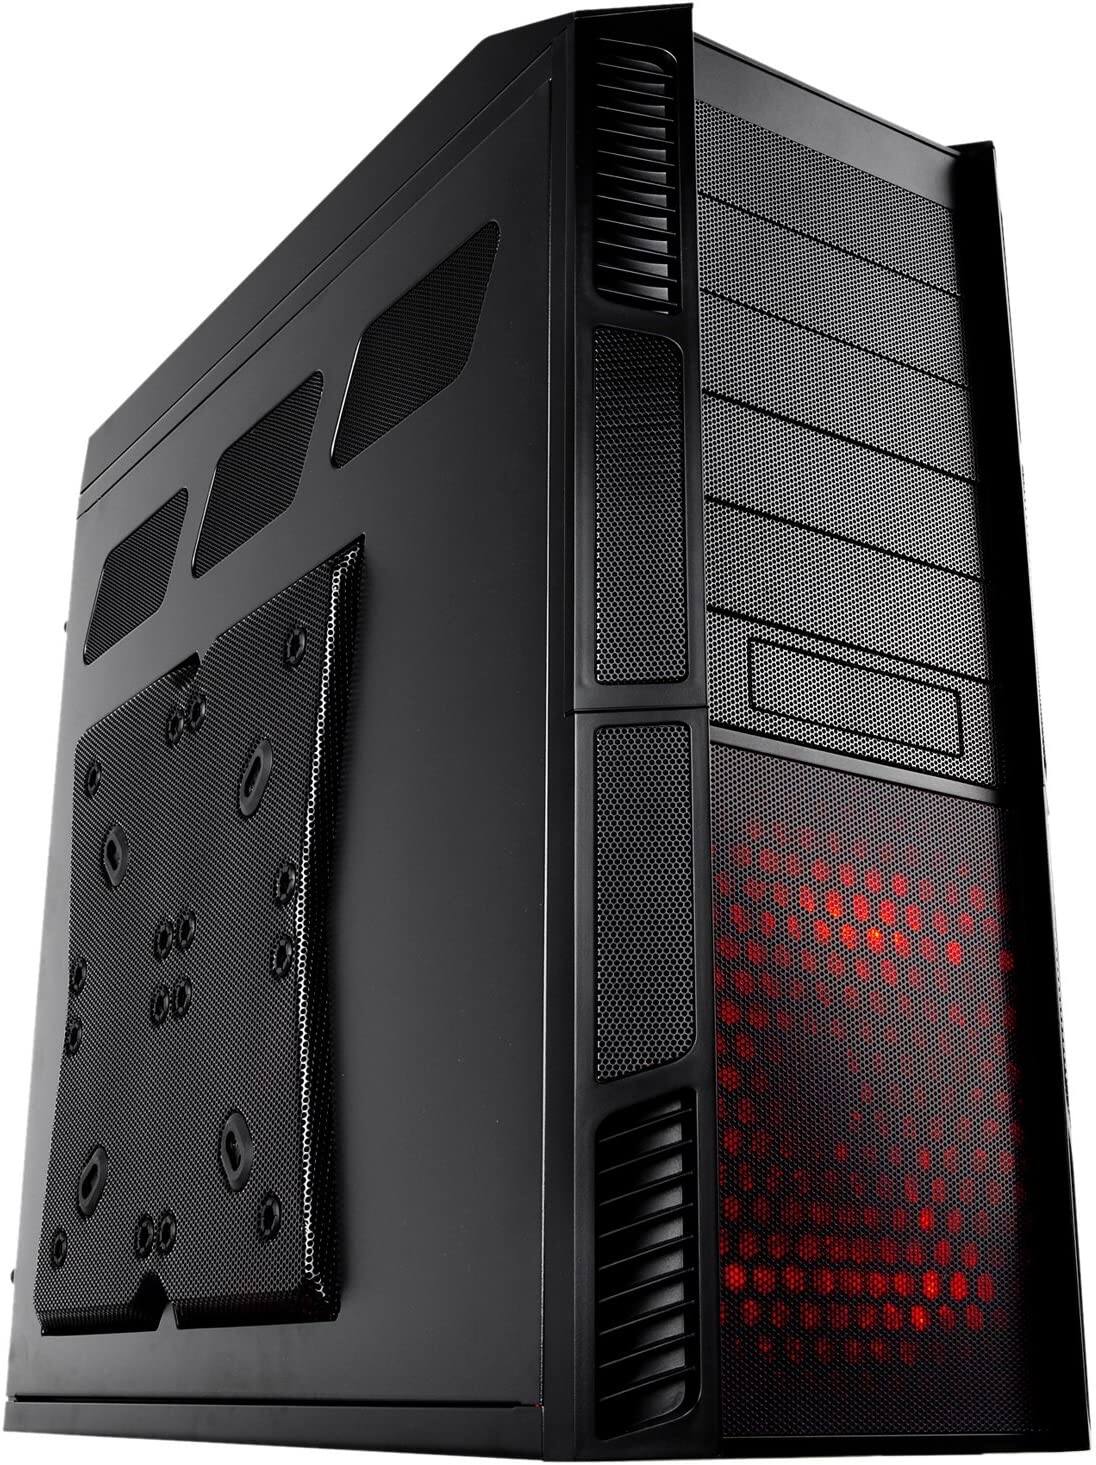 Rosewill ATX Full Tower Case (THOR V2) 4 Fans Included $94.99 + FSSS